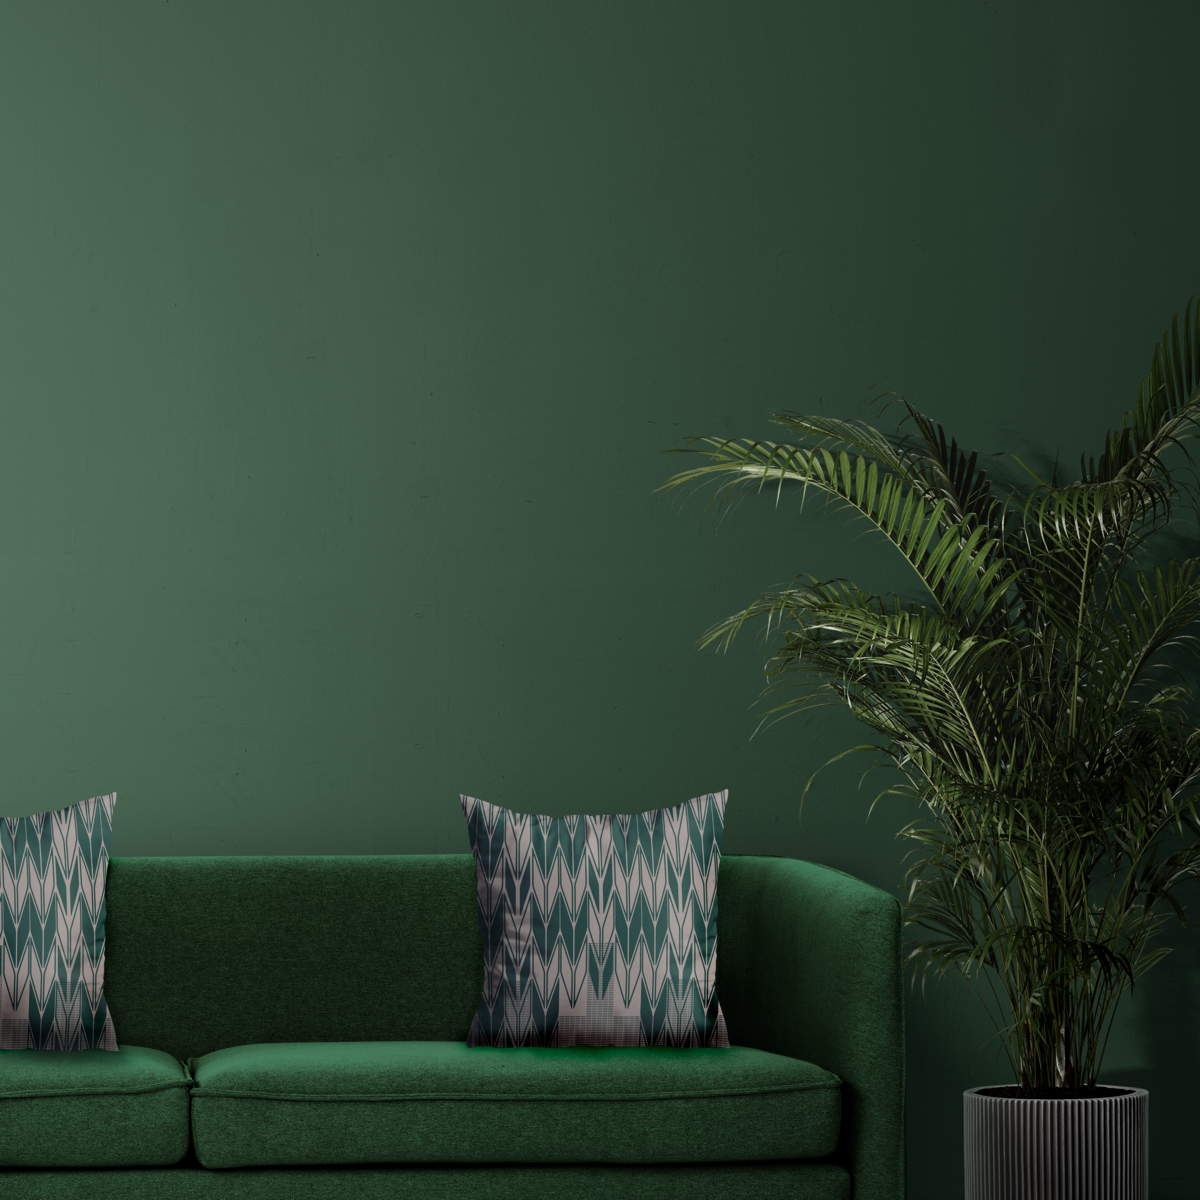 Living Room Mockup_Green Couch